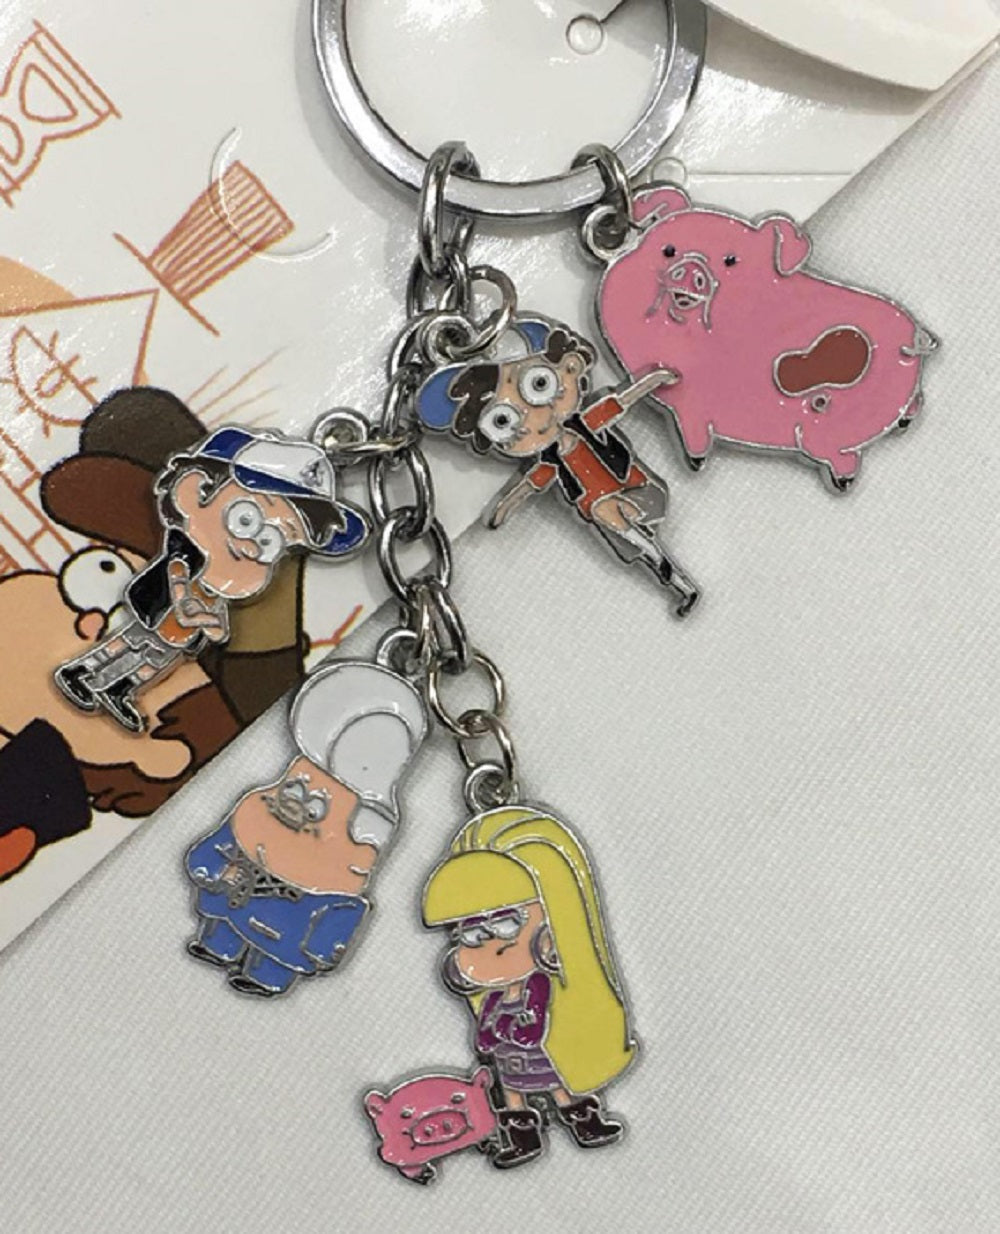 Gravity Falls Keychain - Super Anime Store FREE SHIPPING FAST SHIPPING USA